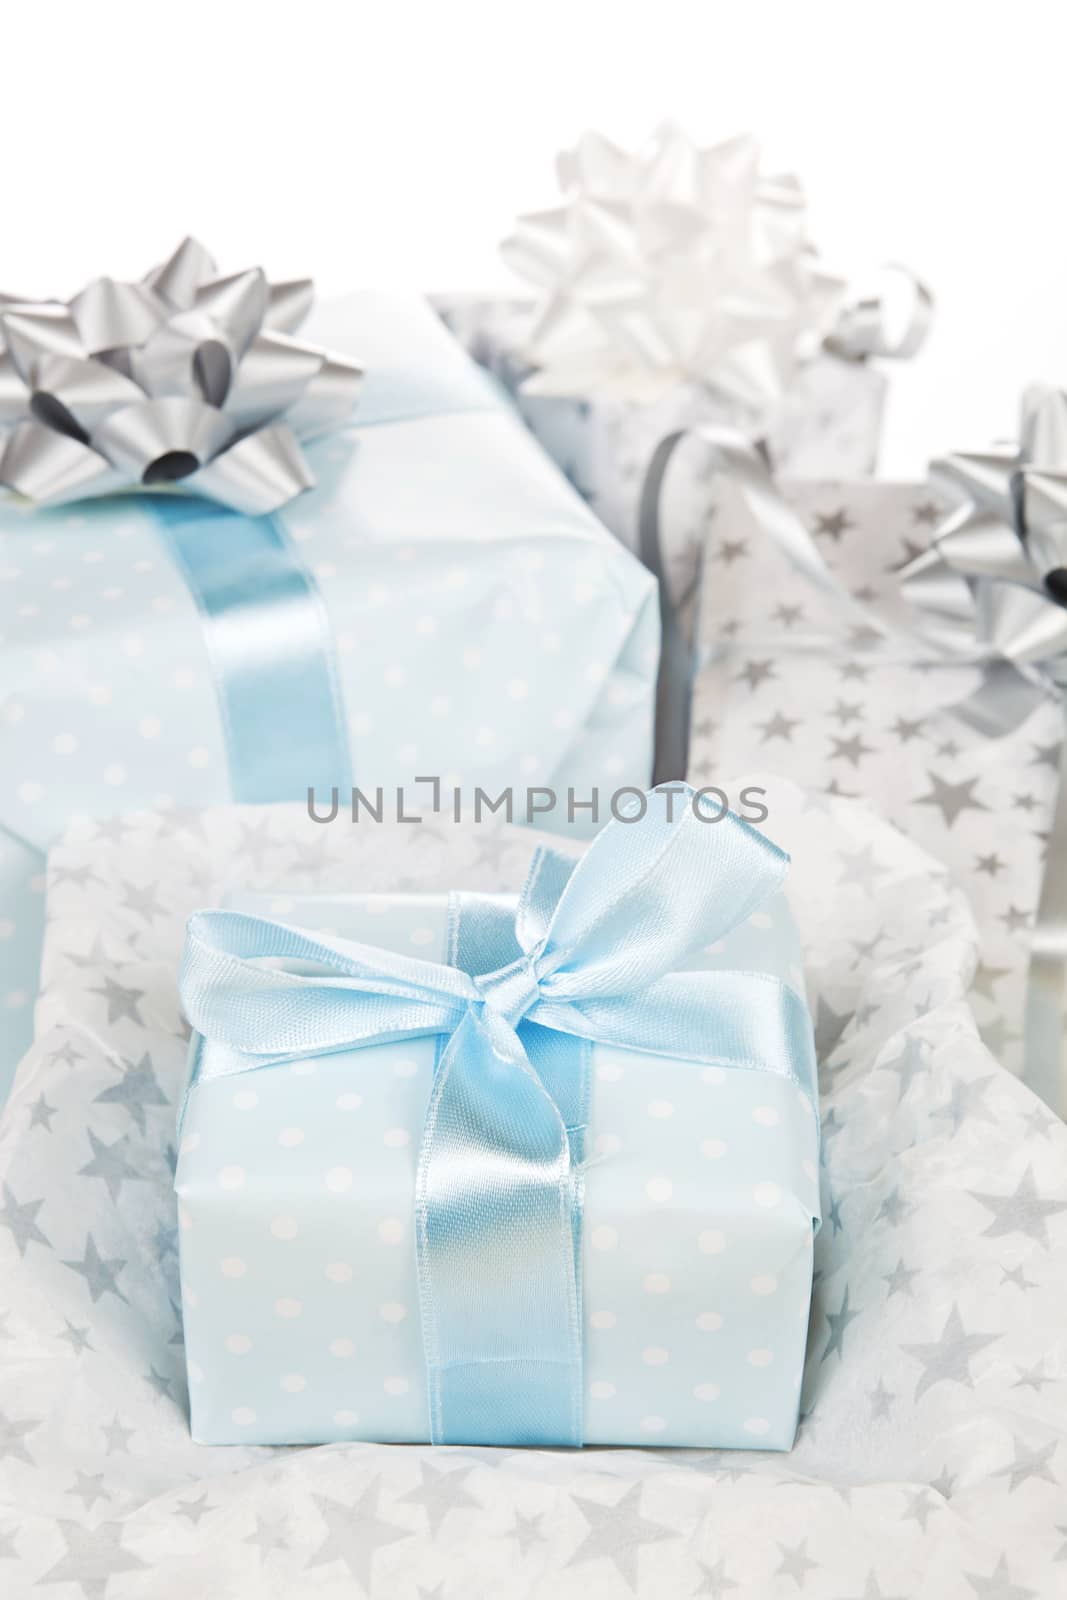 Beautiful gift box set against white background. It is all about giving concept.